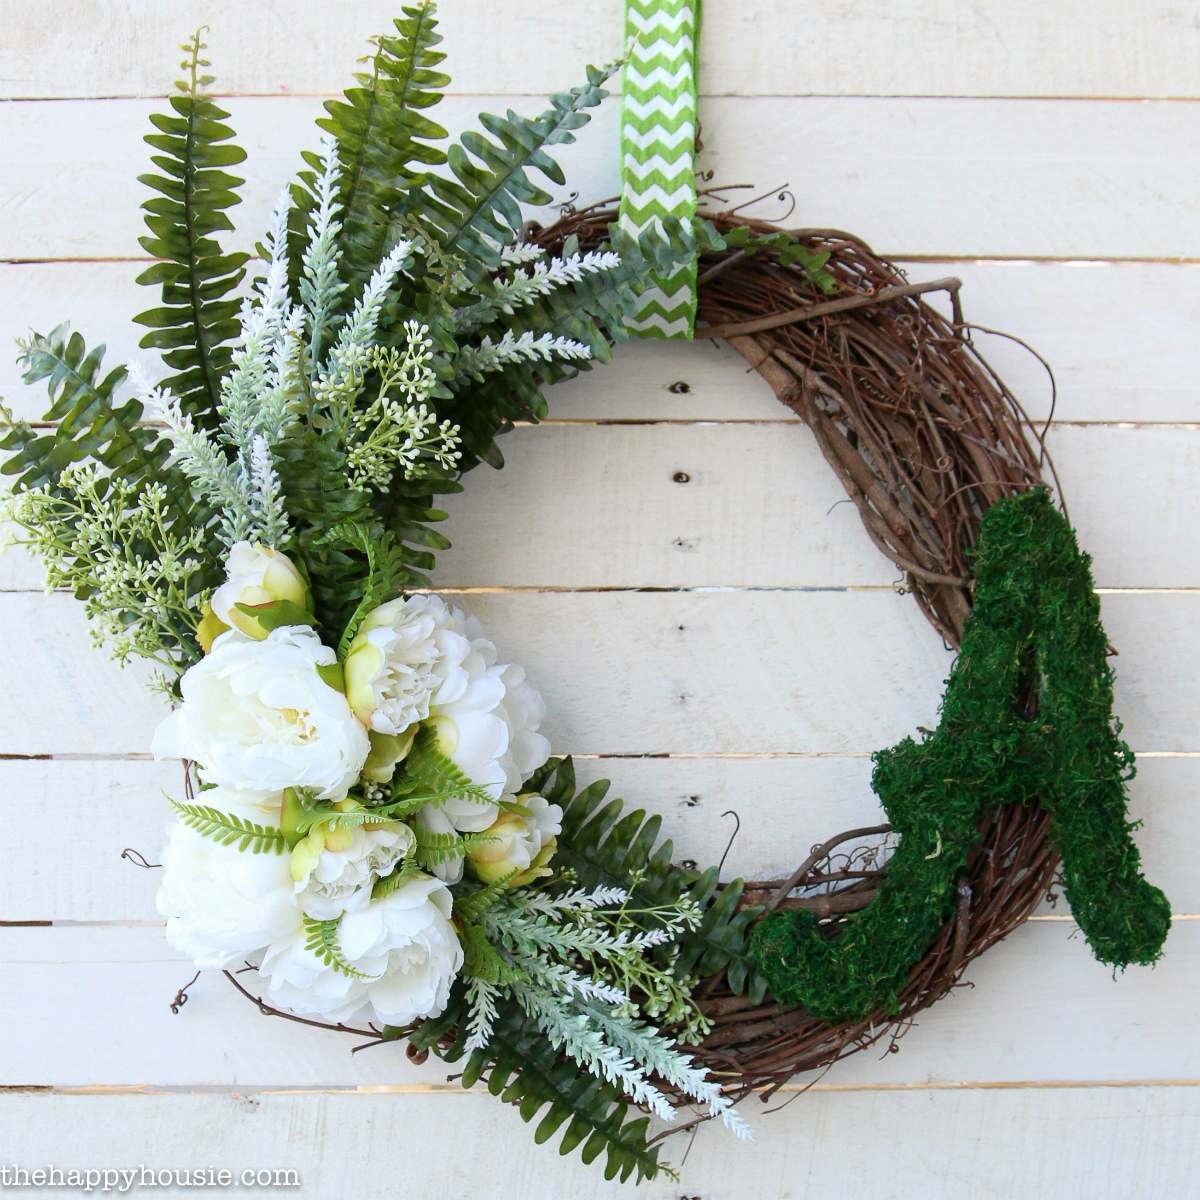 A twig wreath with lots of greenery and white flowers hanging by a white and green ribbon on the door.